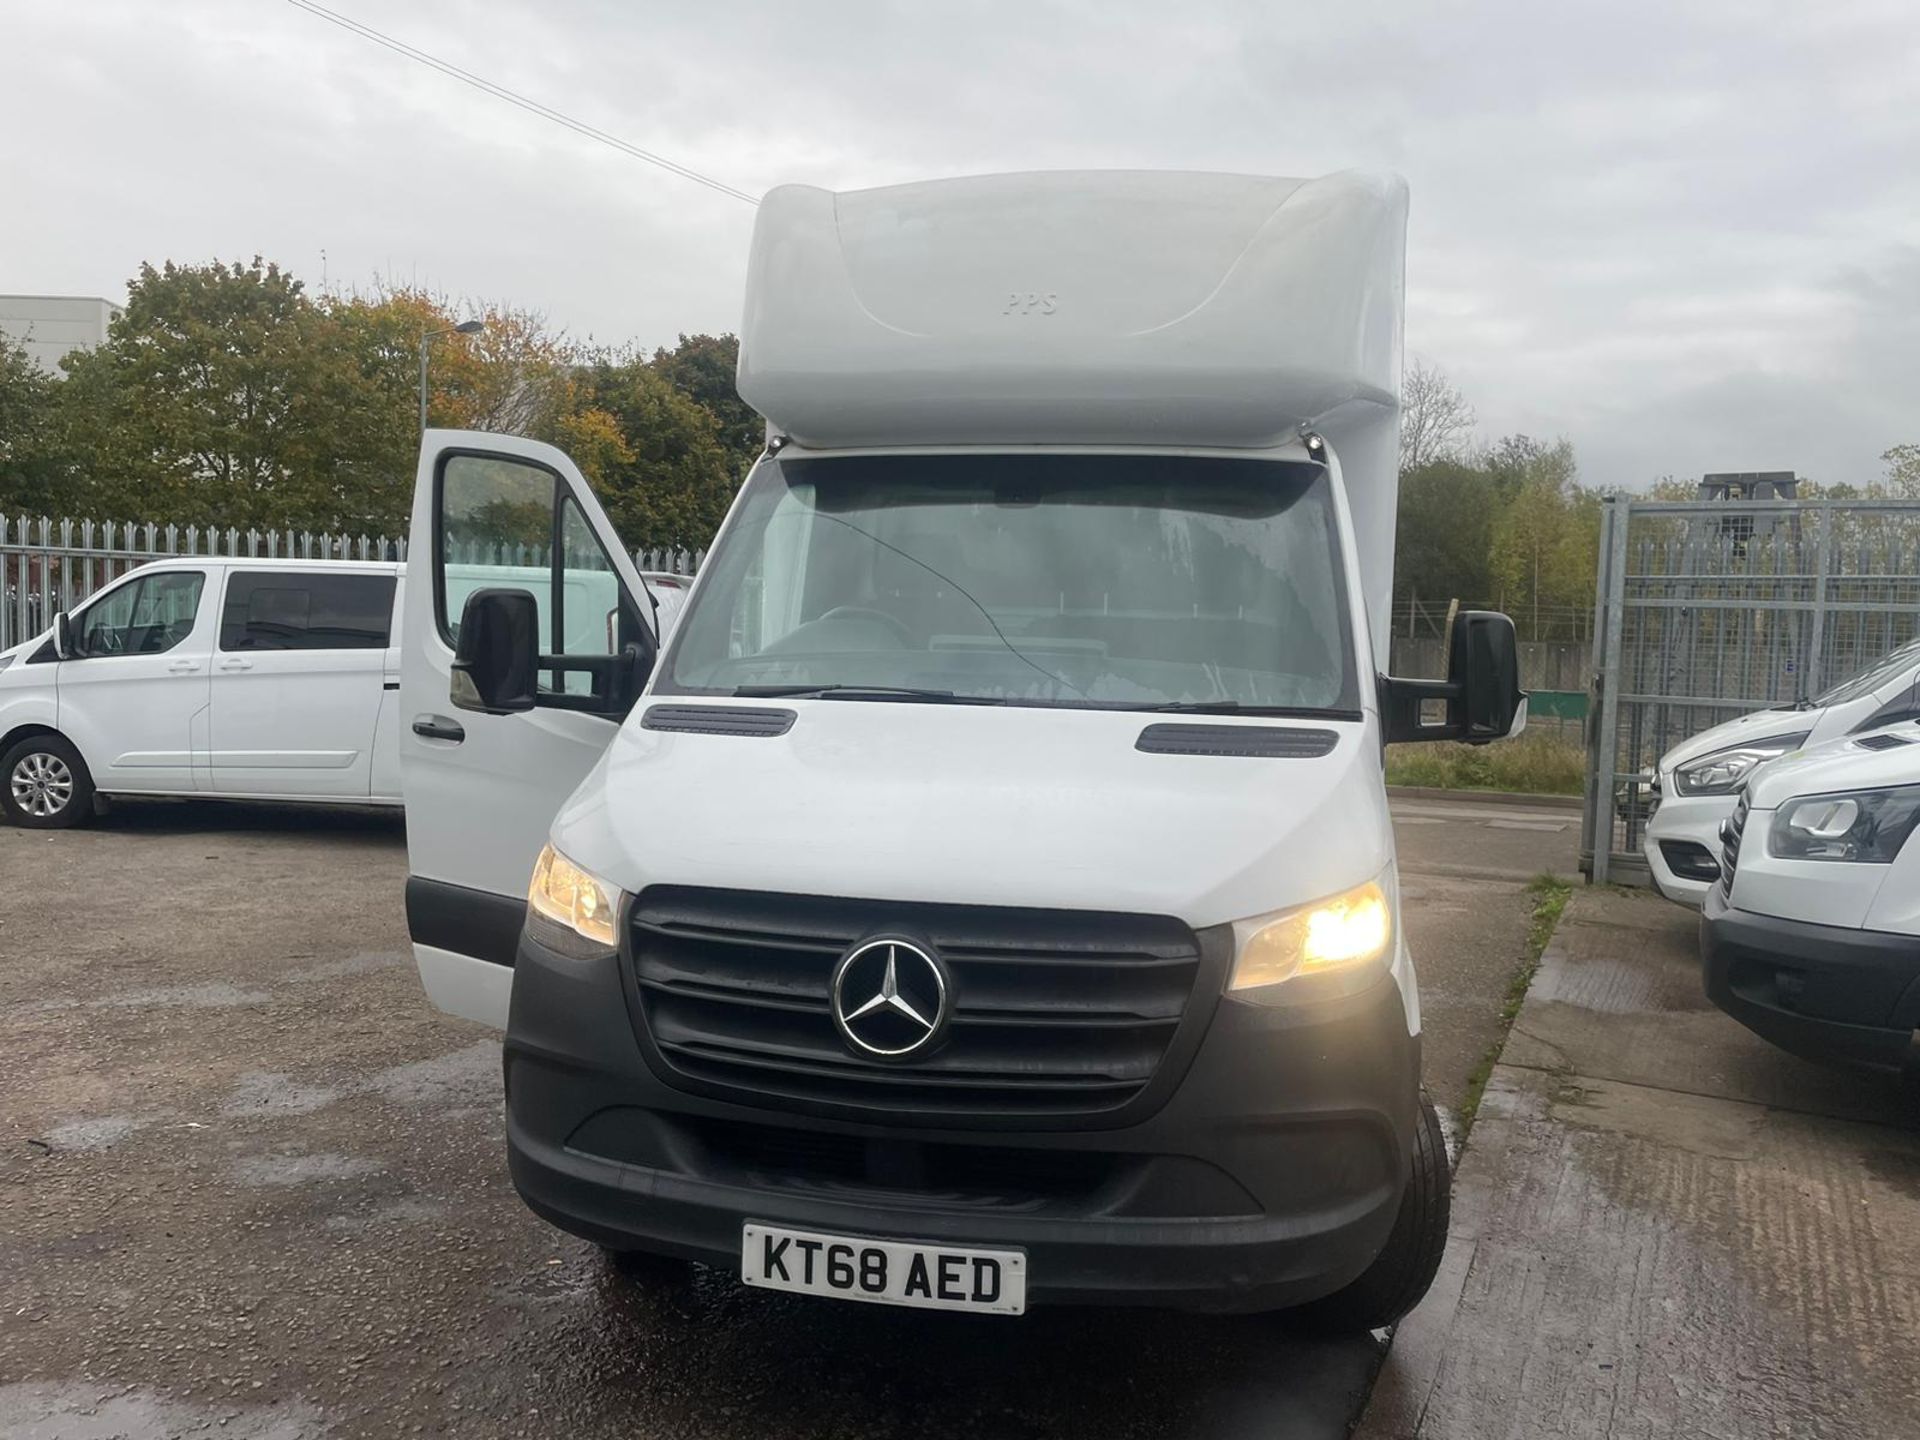 2018 MERCEDES SPRINTER 314 CDTI LUTON WITH TAIL LIFT - 108,356 WARRANTED MILES - 2.2 EURO 6 ENGINE  - Image 2 of 10